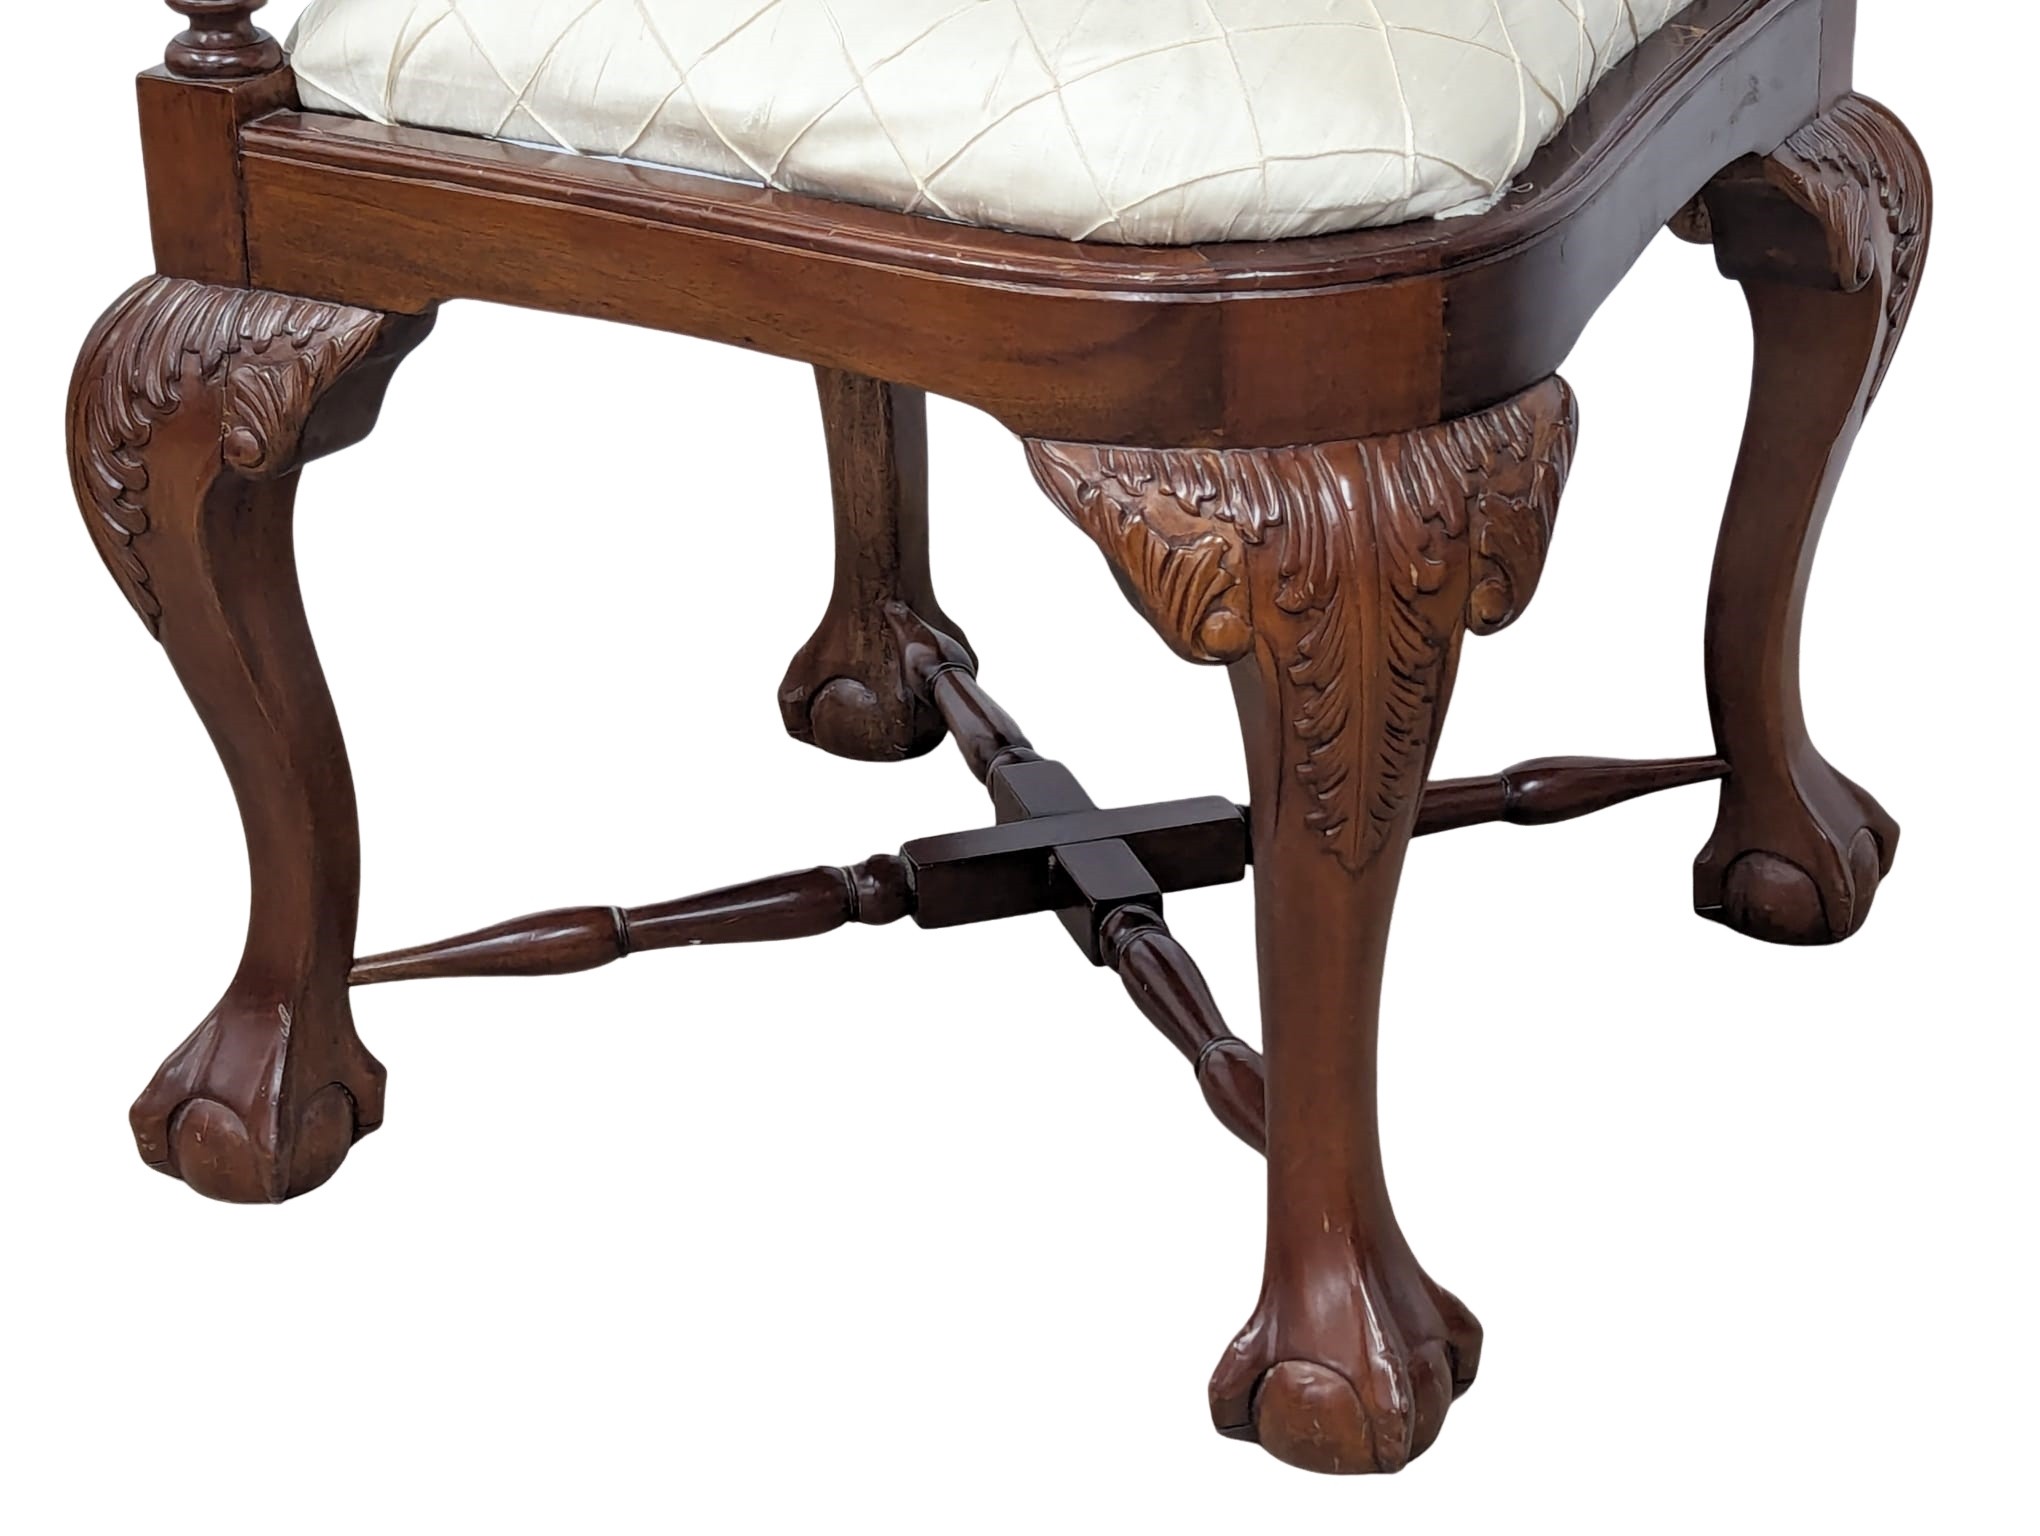 A pair of Chippendale Style mahogany corner armchairs on ball and claw feet. - Image 2 of 4